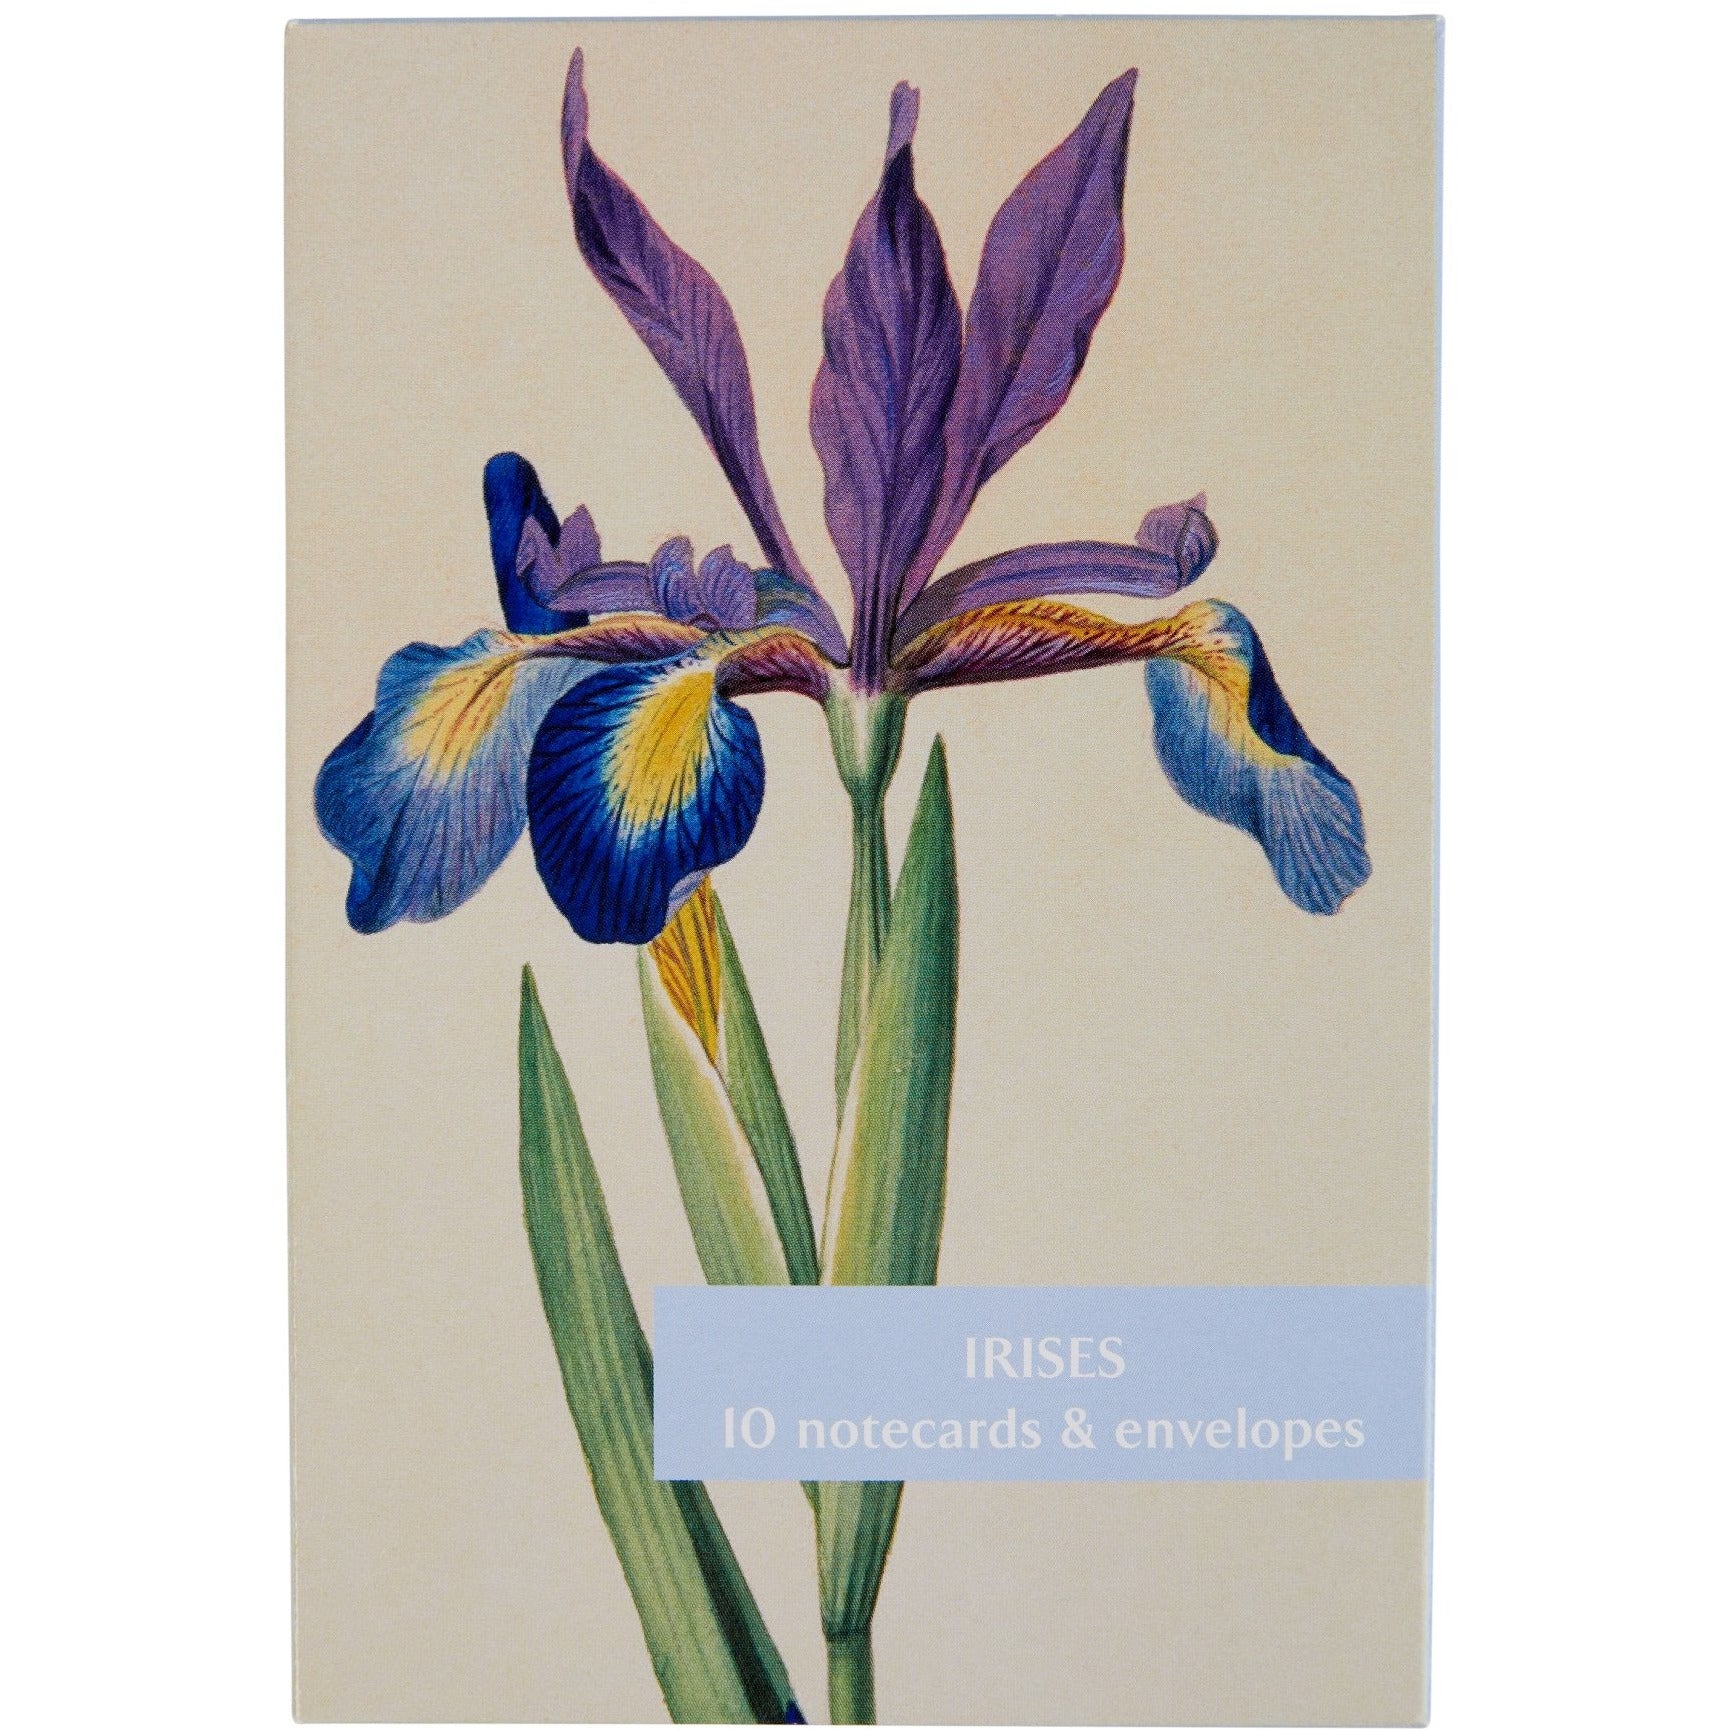 Notecard pack - Irises from the Broughton collection of The Fitzwilliam Museum. Brought to you by CuratingCambridge.com